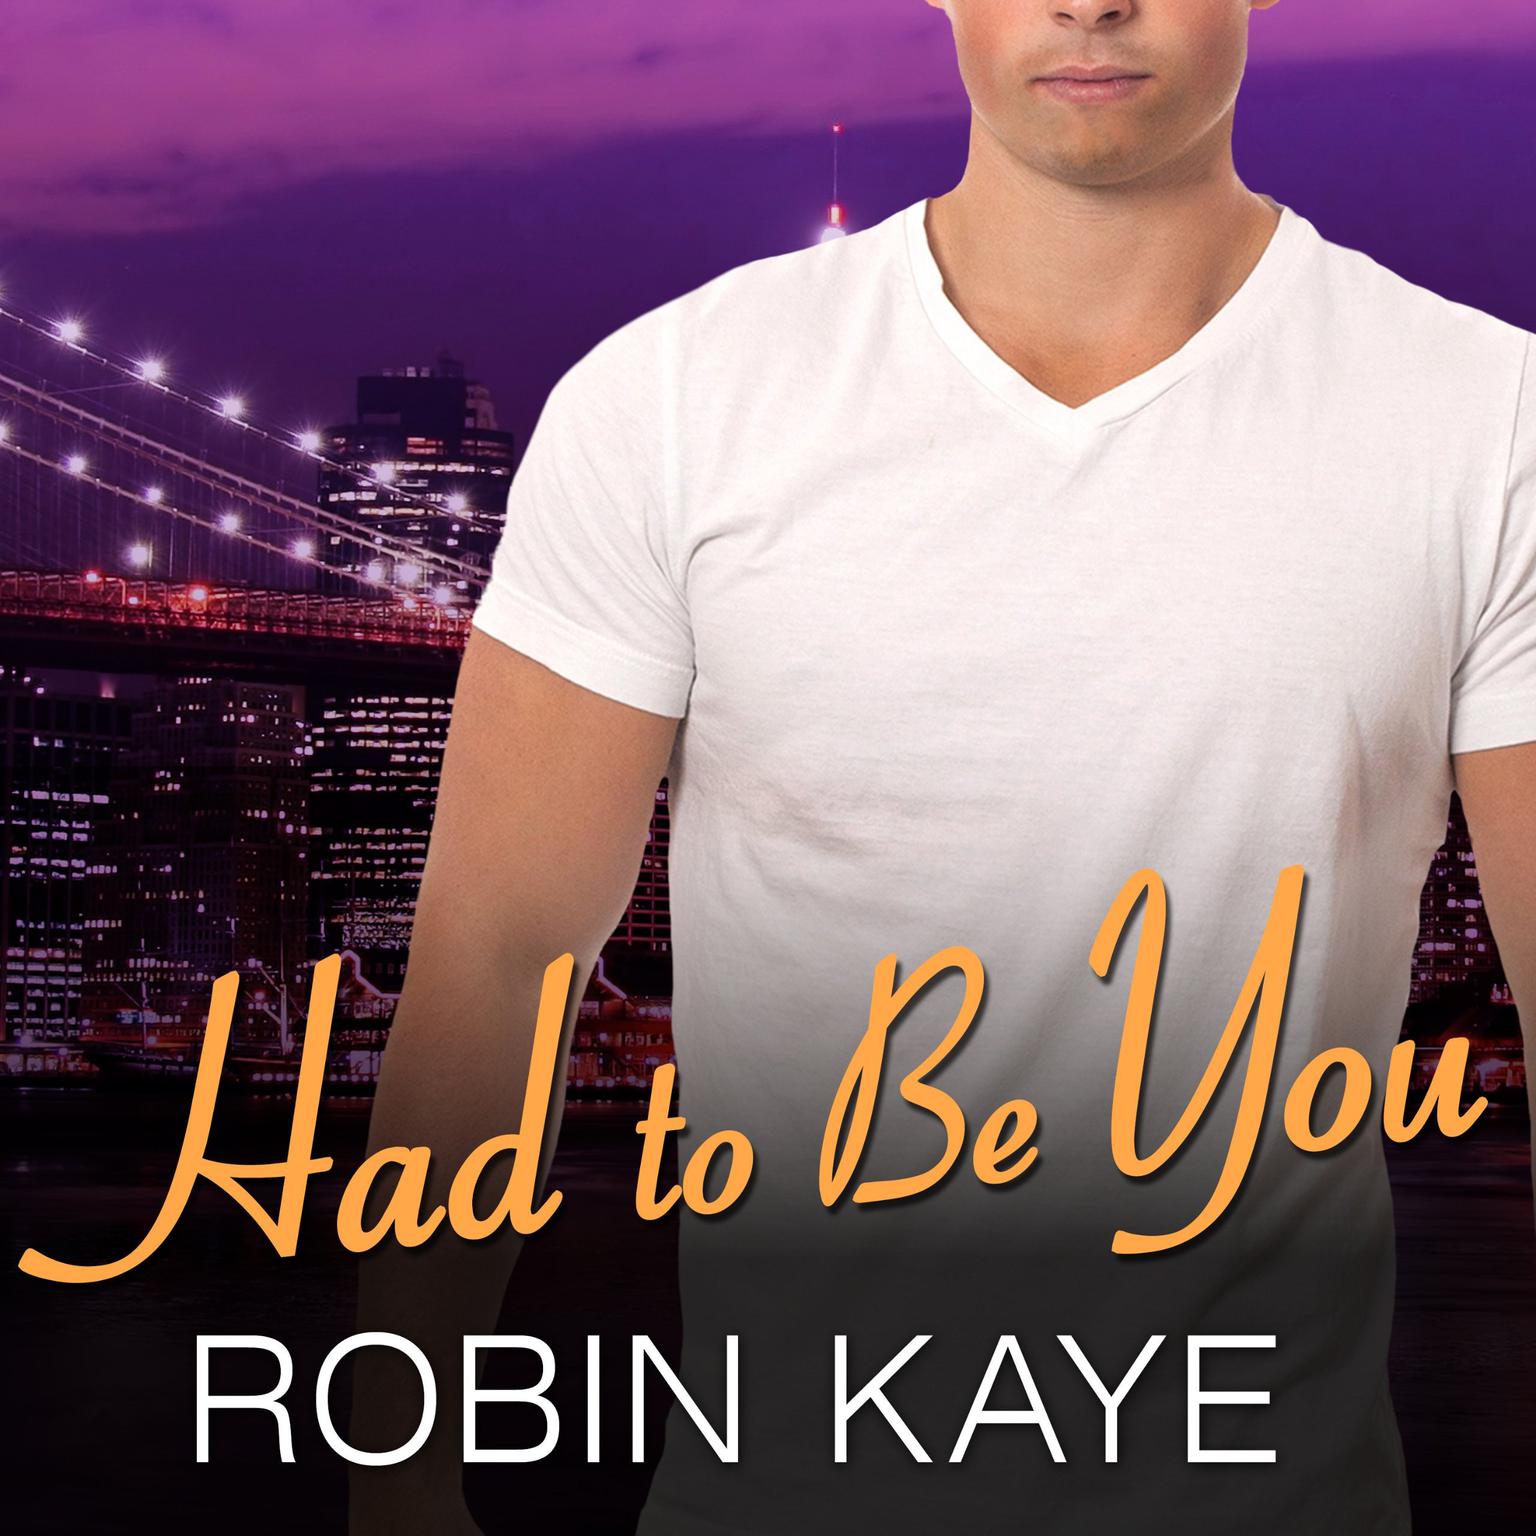 Had to Be You Audiobook, by Robin Kaye